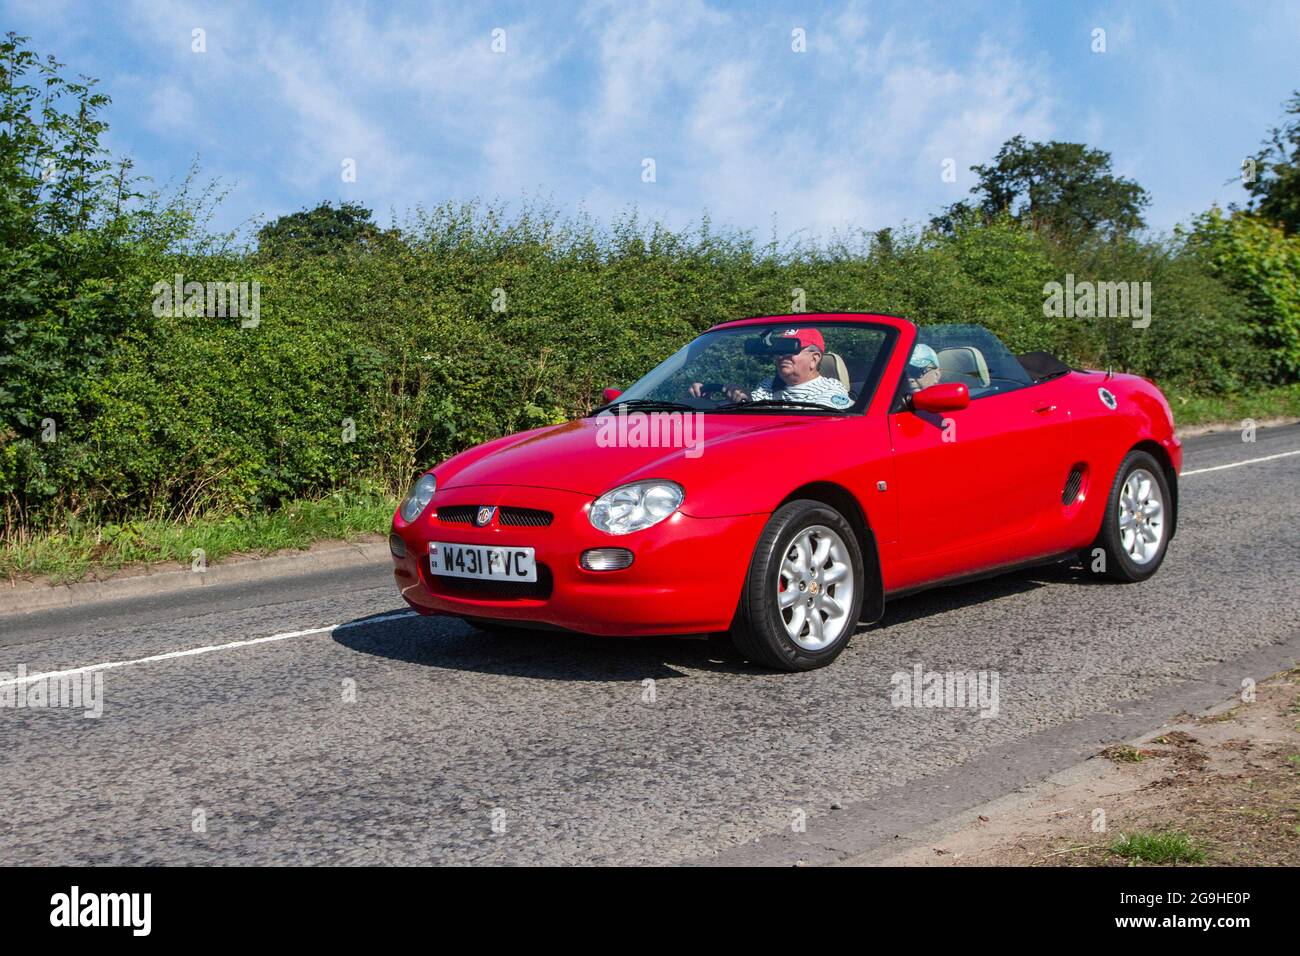 2000 red MG VVC 5 speed manual 1796cc petrol cabrio, en-route to Capesthorne Hall classic July car show, Cheshire, UK Stock Photo